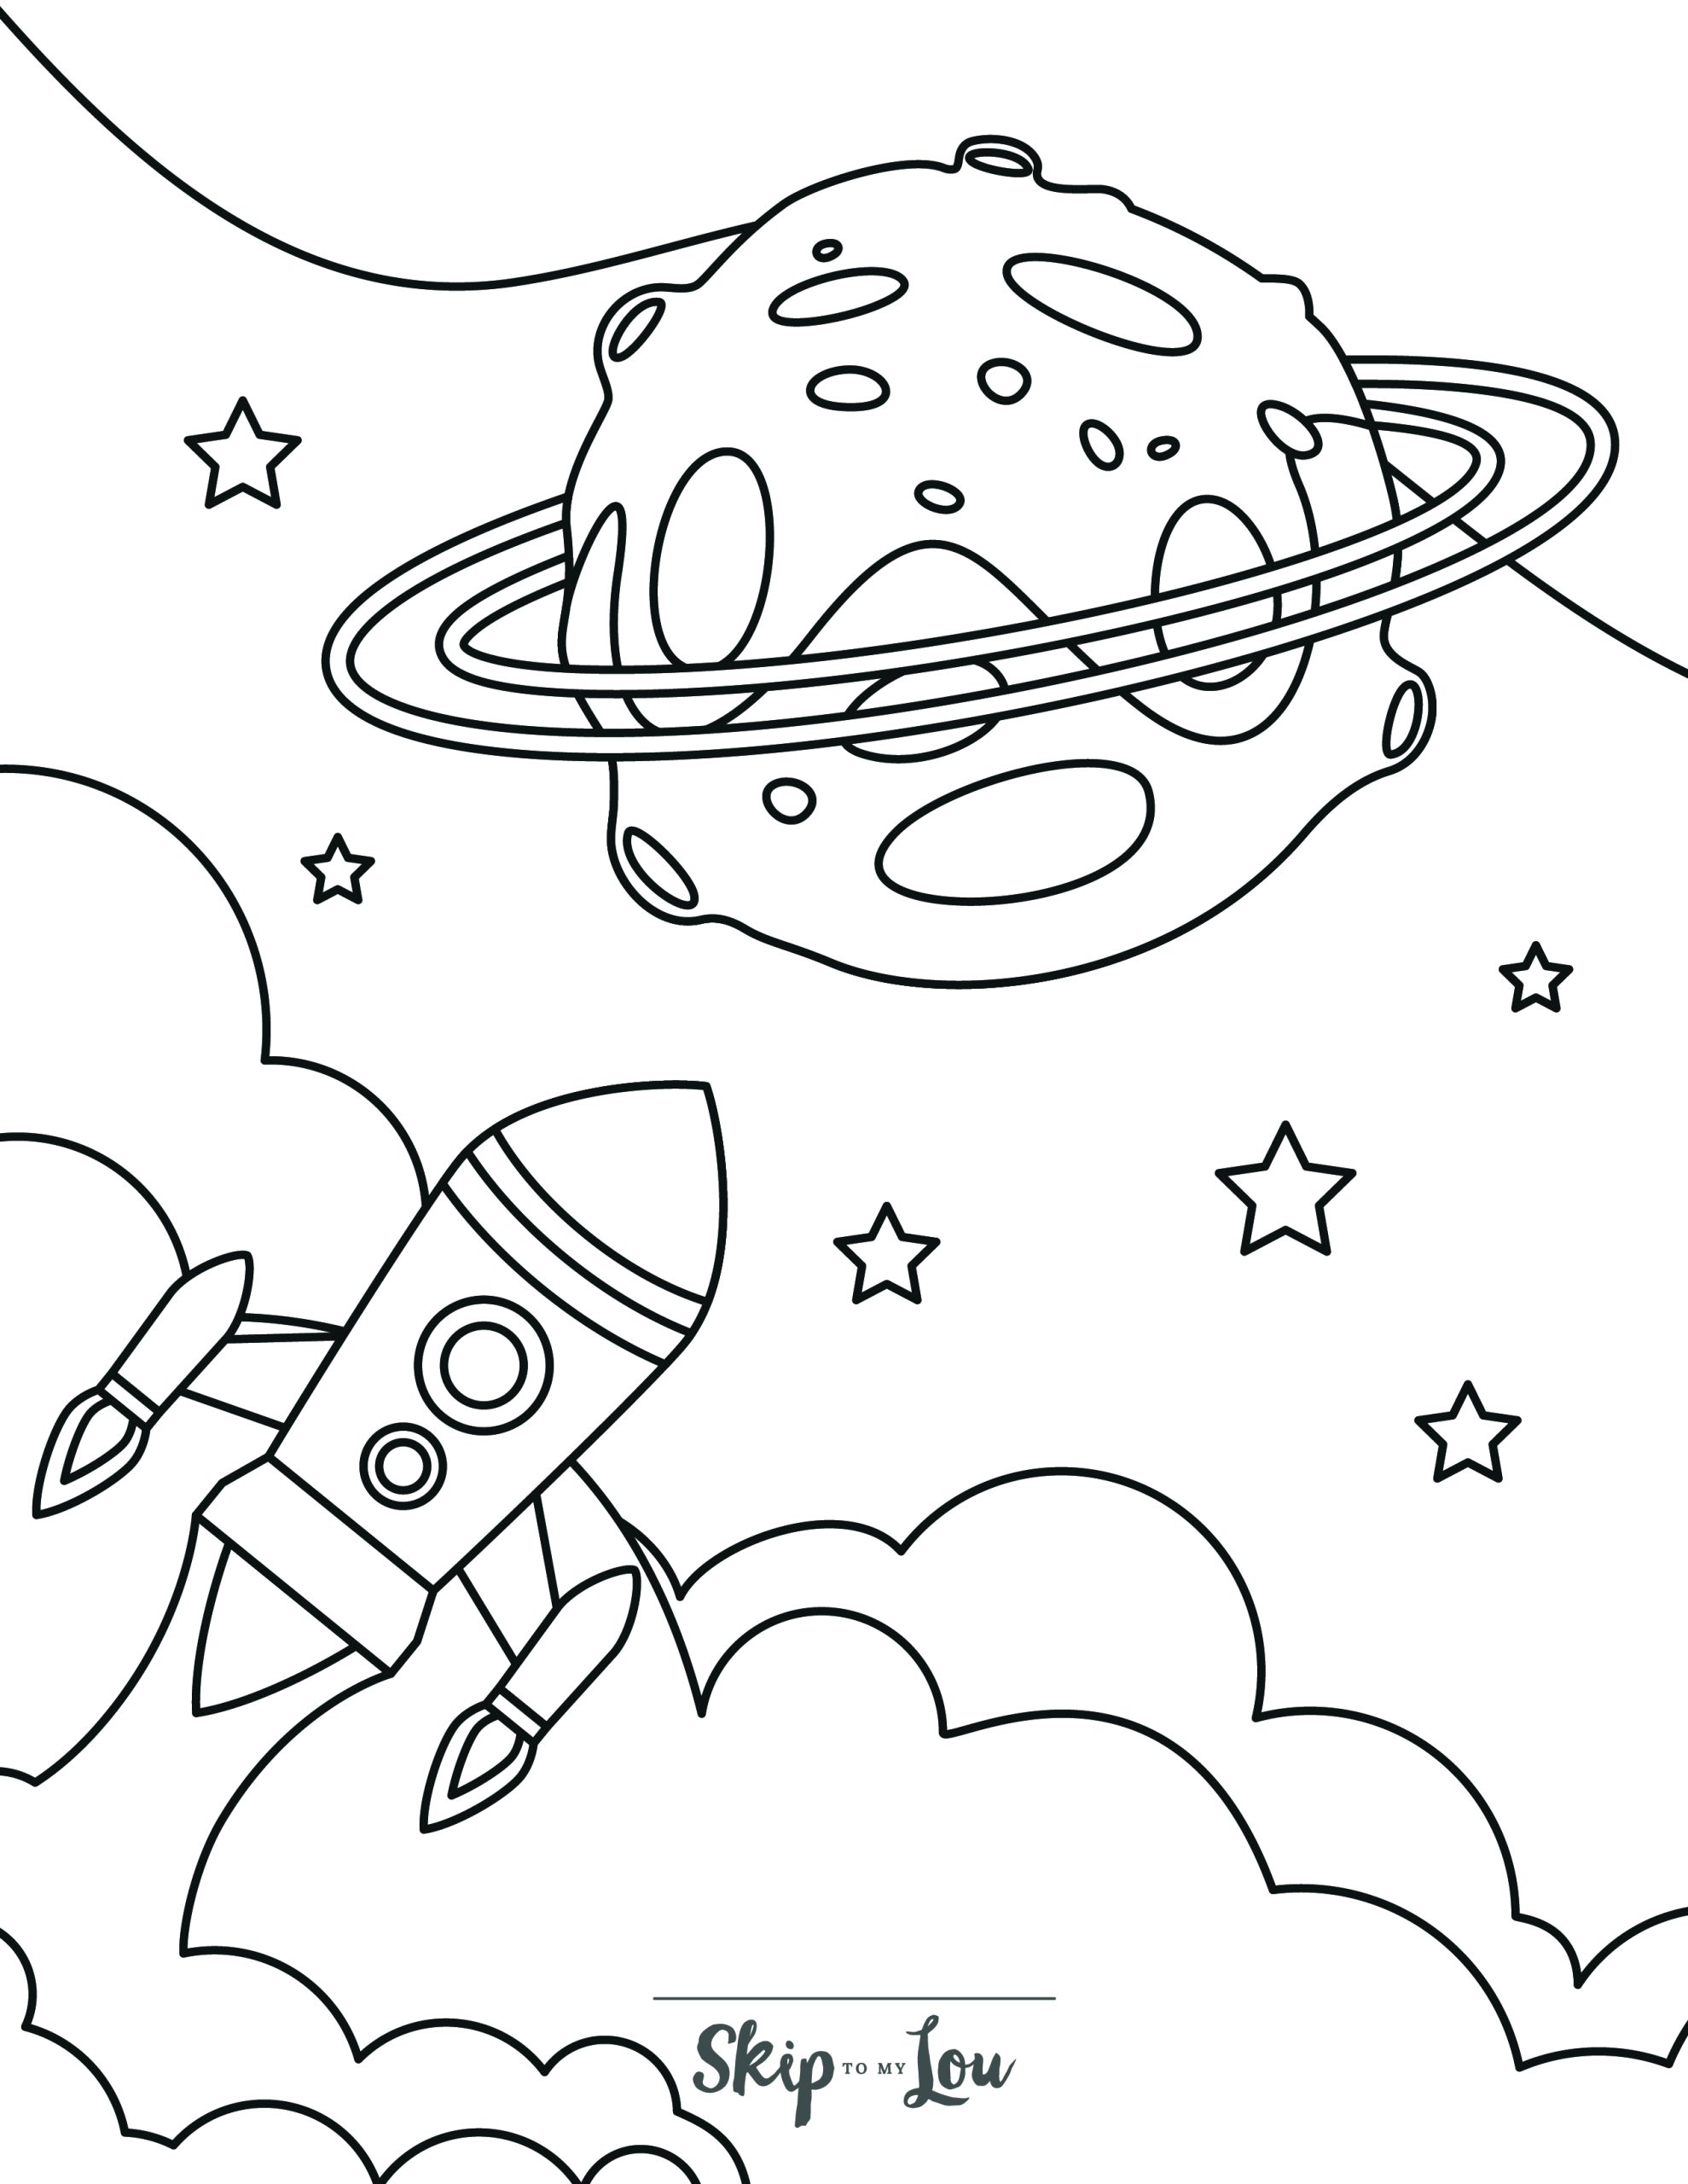 Skip to my Lou - Space Coloring Pages - Line drawing of a rocket heading towards a planet in space